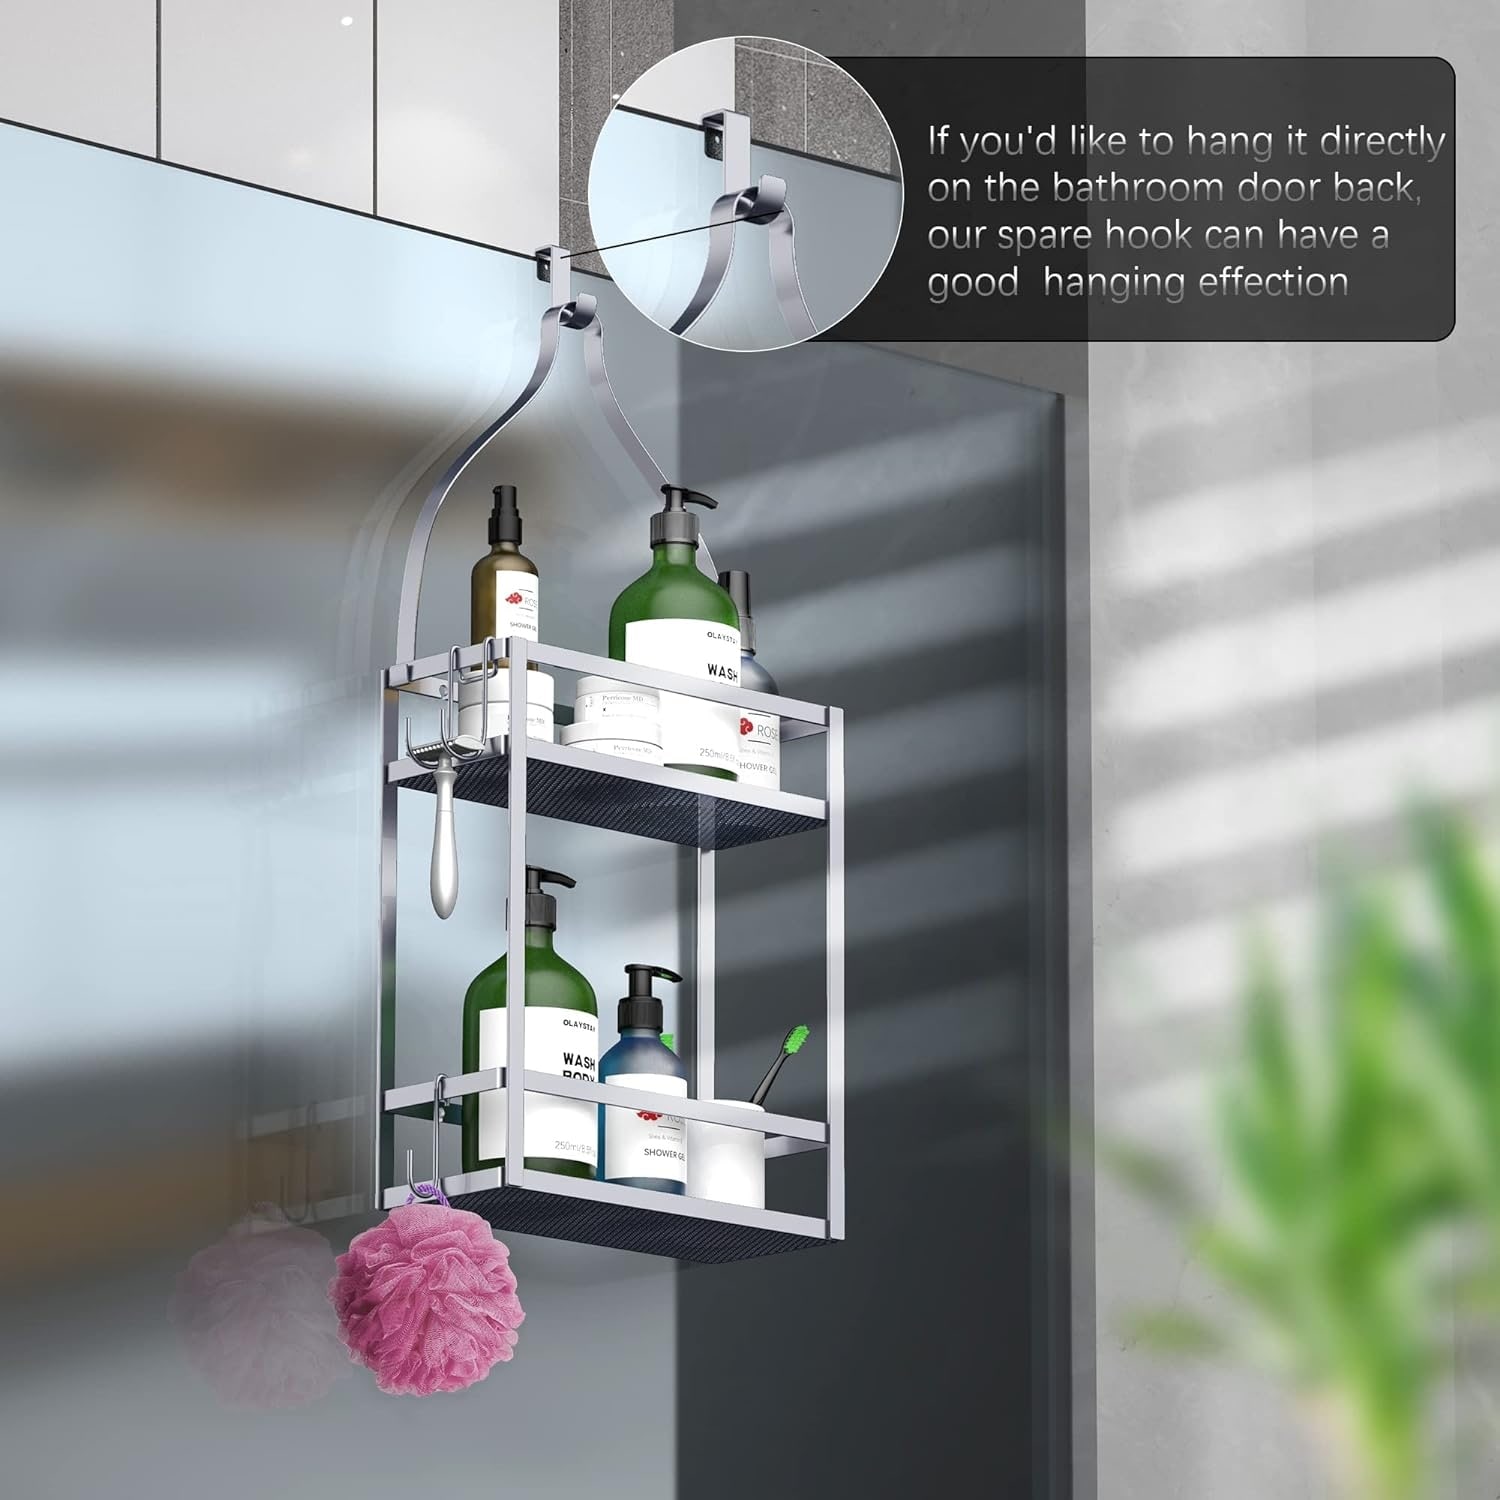 https://ak1.ostkcdn.com/images/products/is/images/direct/543b17e70d250b24a525527f6ebd0644942bd697/Shower-Caddy-with-Hooks%2C-Mounting-Over-Shower-Head-Or-Door.jpg